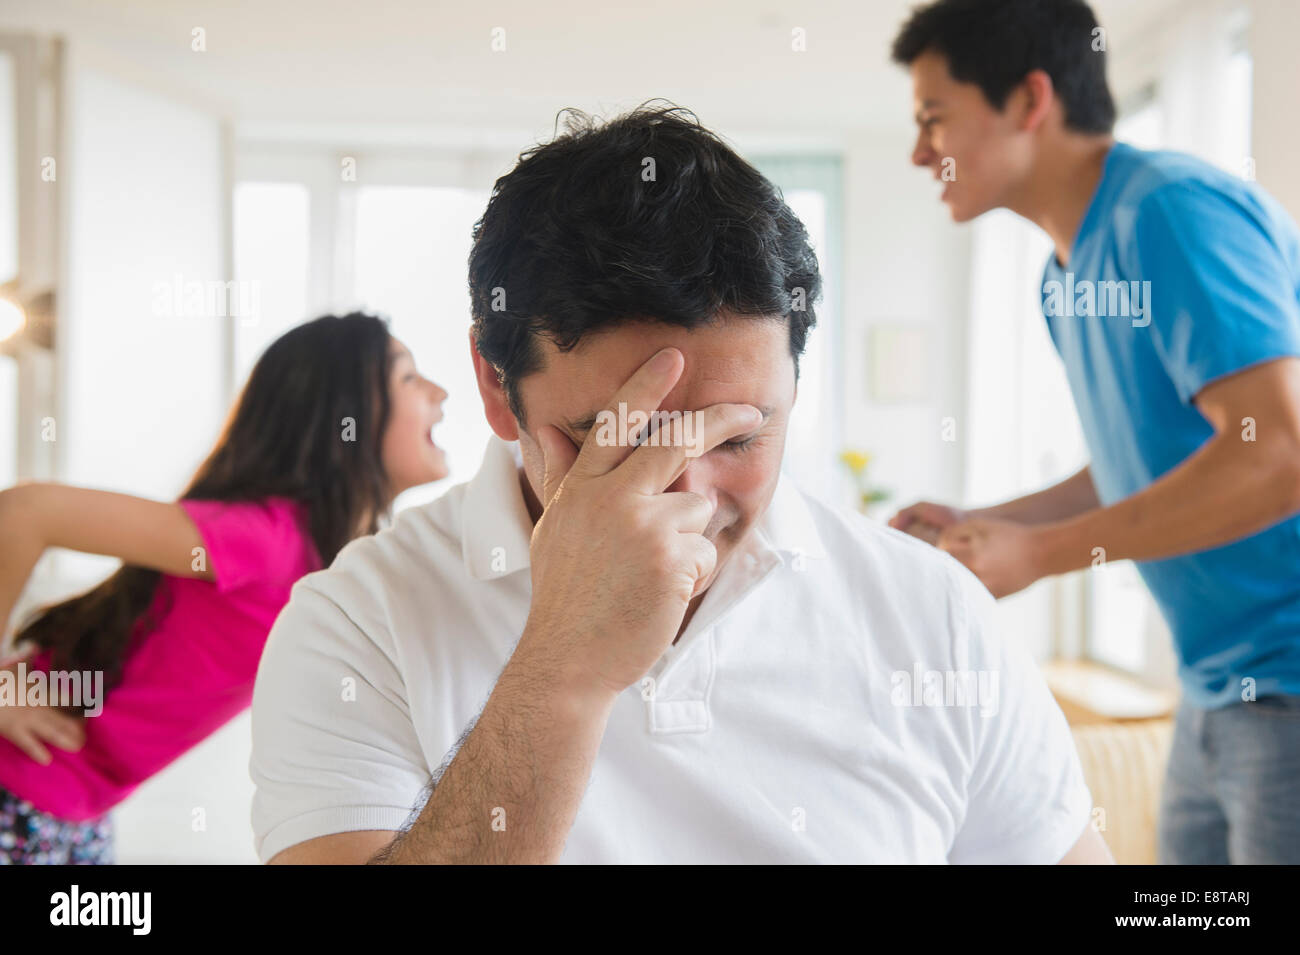 Hispanic father covering his face as children fight behind him Stock Photo